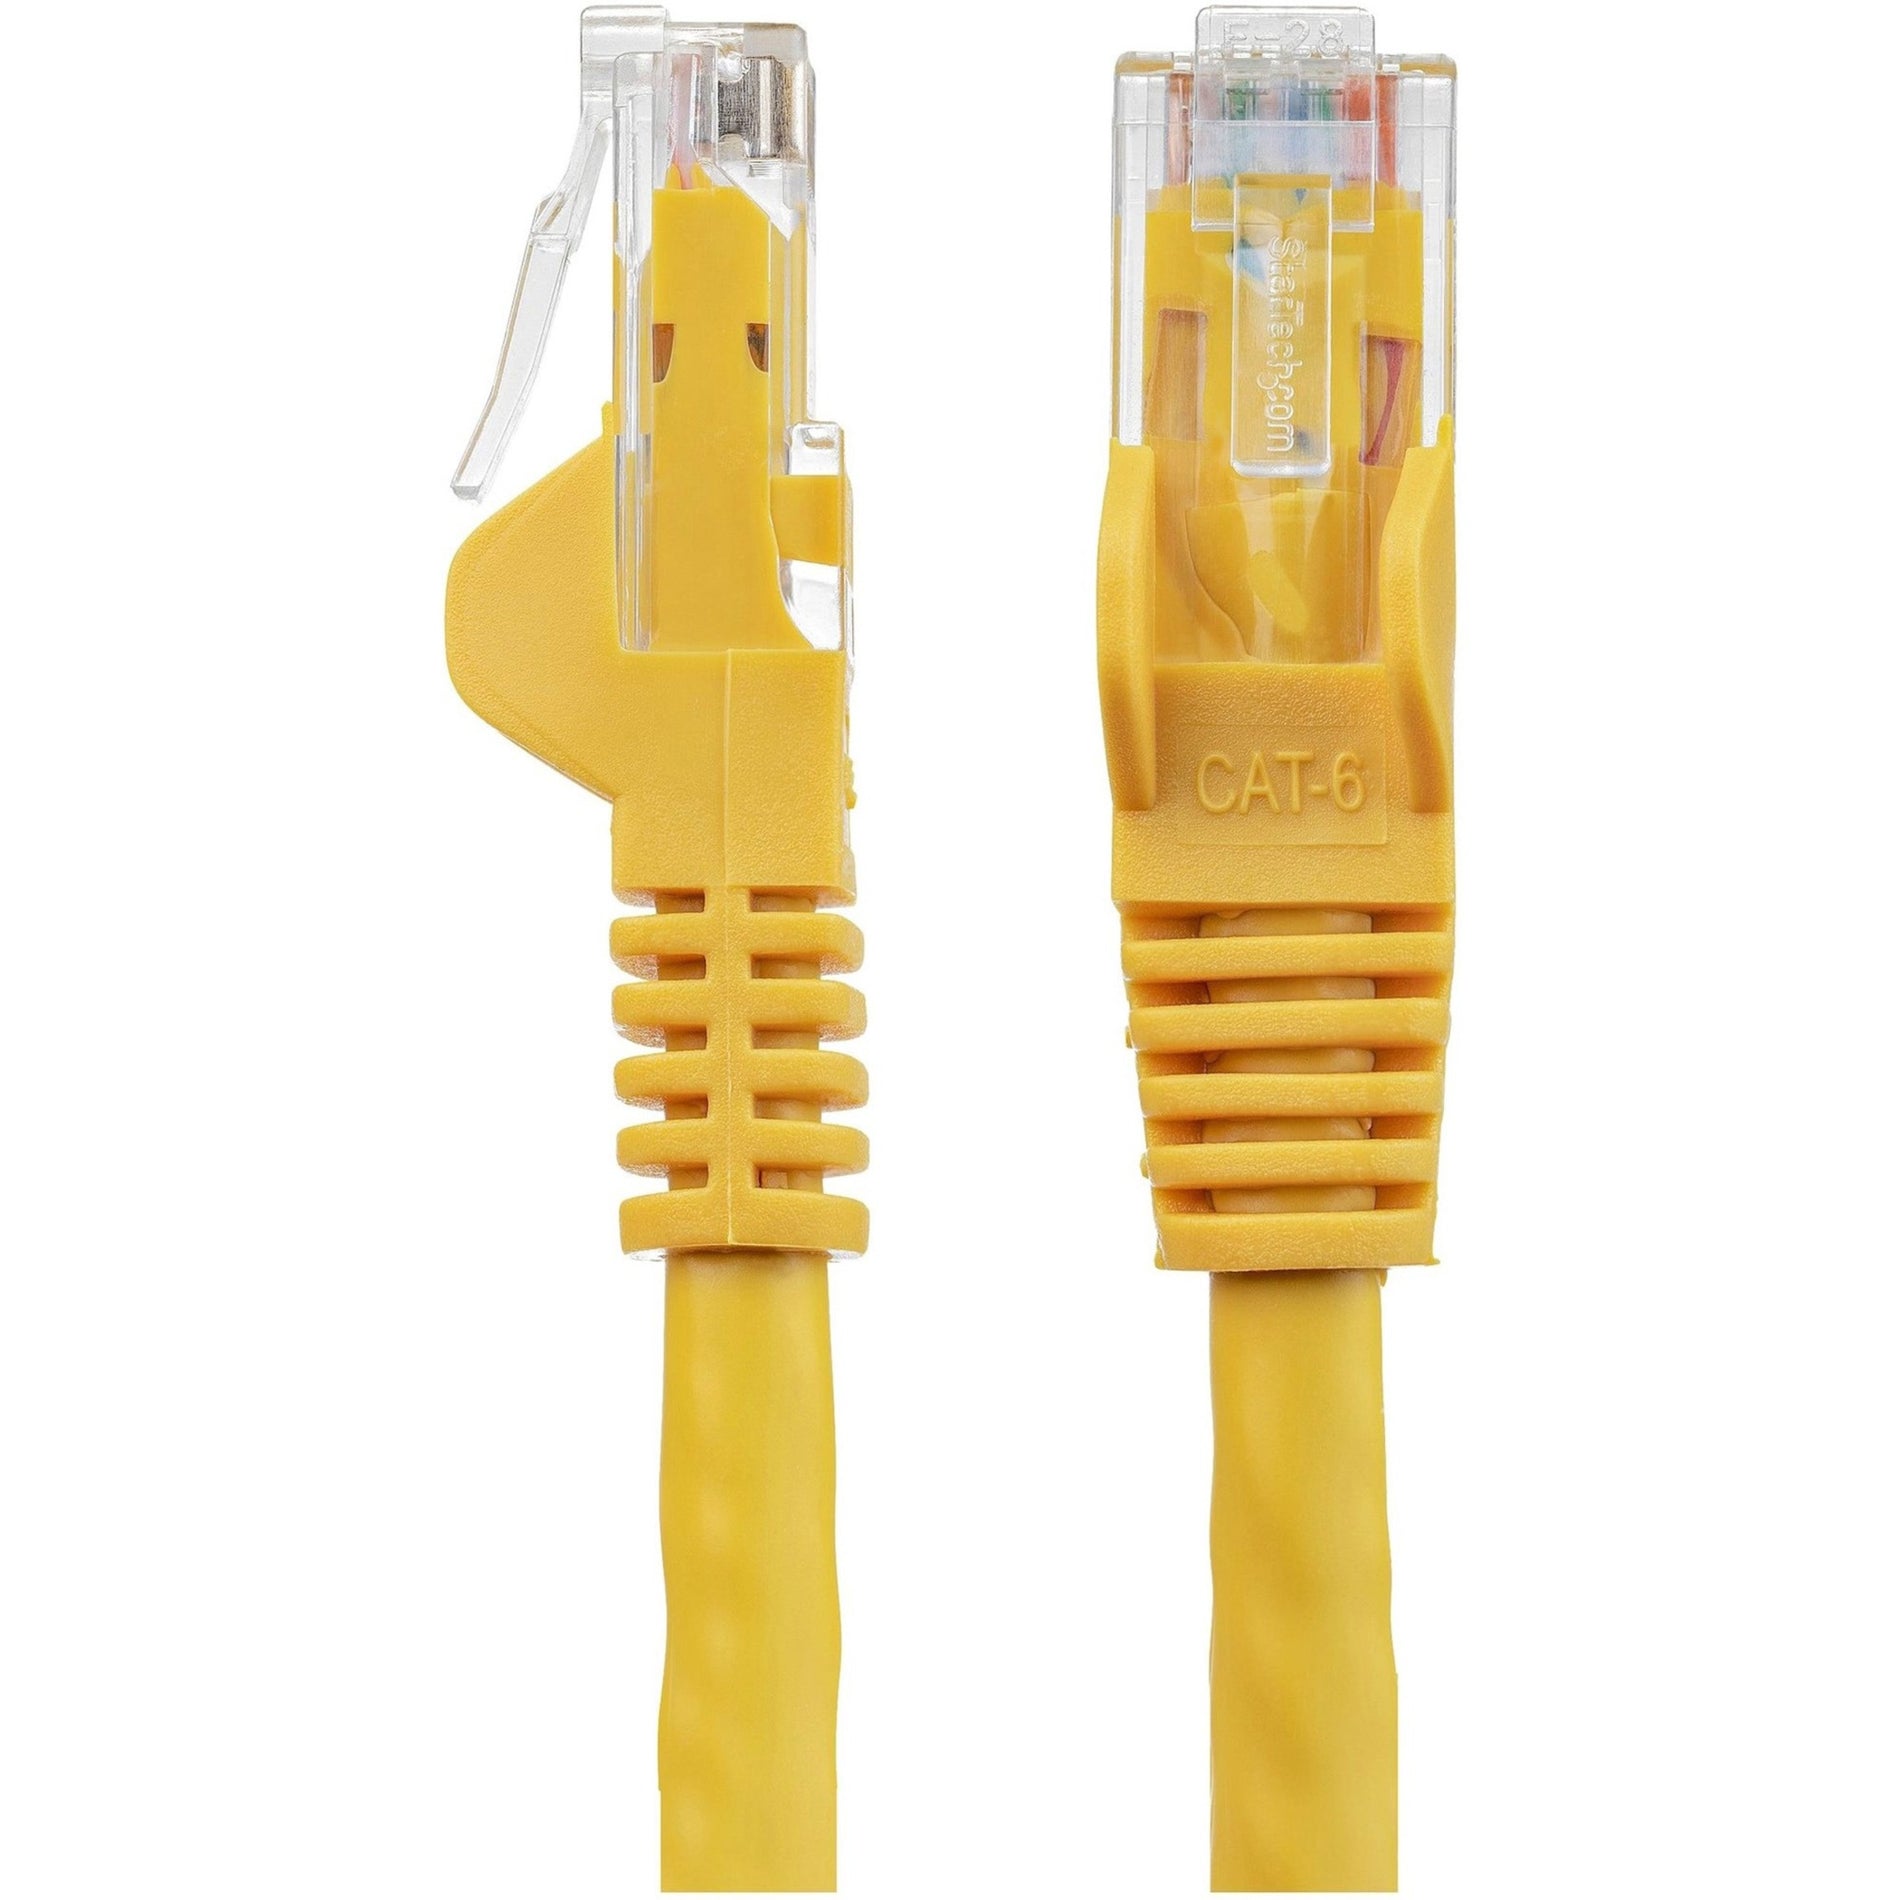 StarTech.com N6PATCH15YL 15 ft Yellow Snagless Cat6 UTP Patch Cable, 10 Gbit/s Data Transfer Rate, Lifetime Warranty